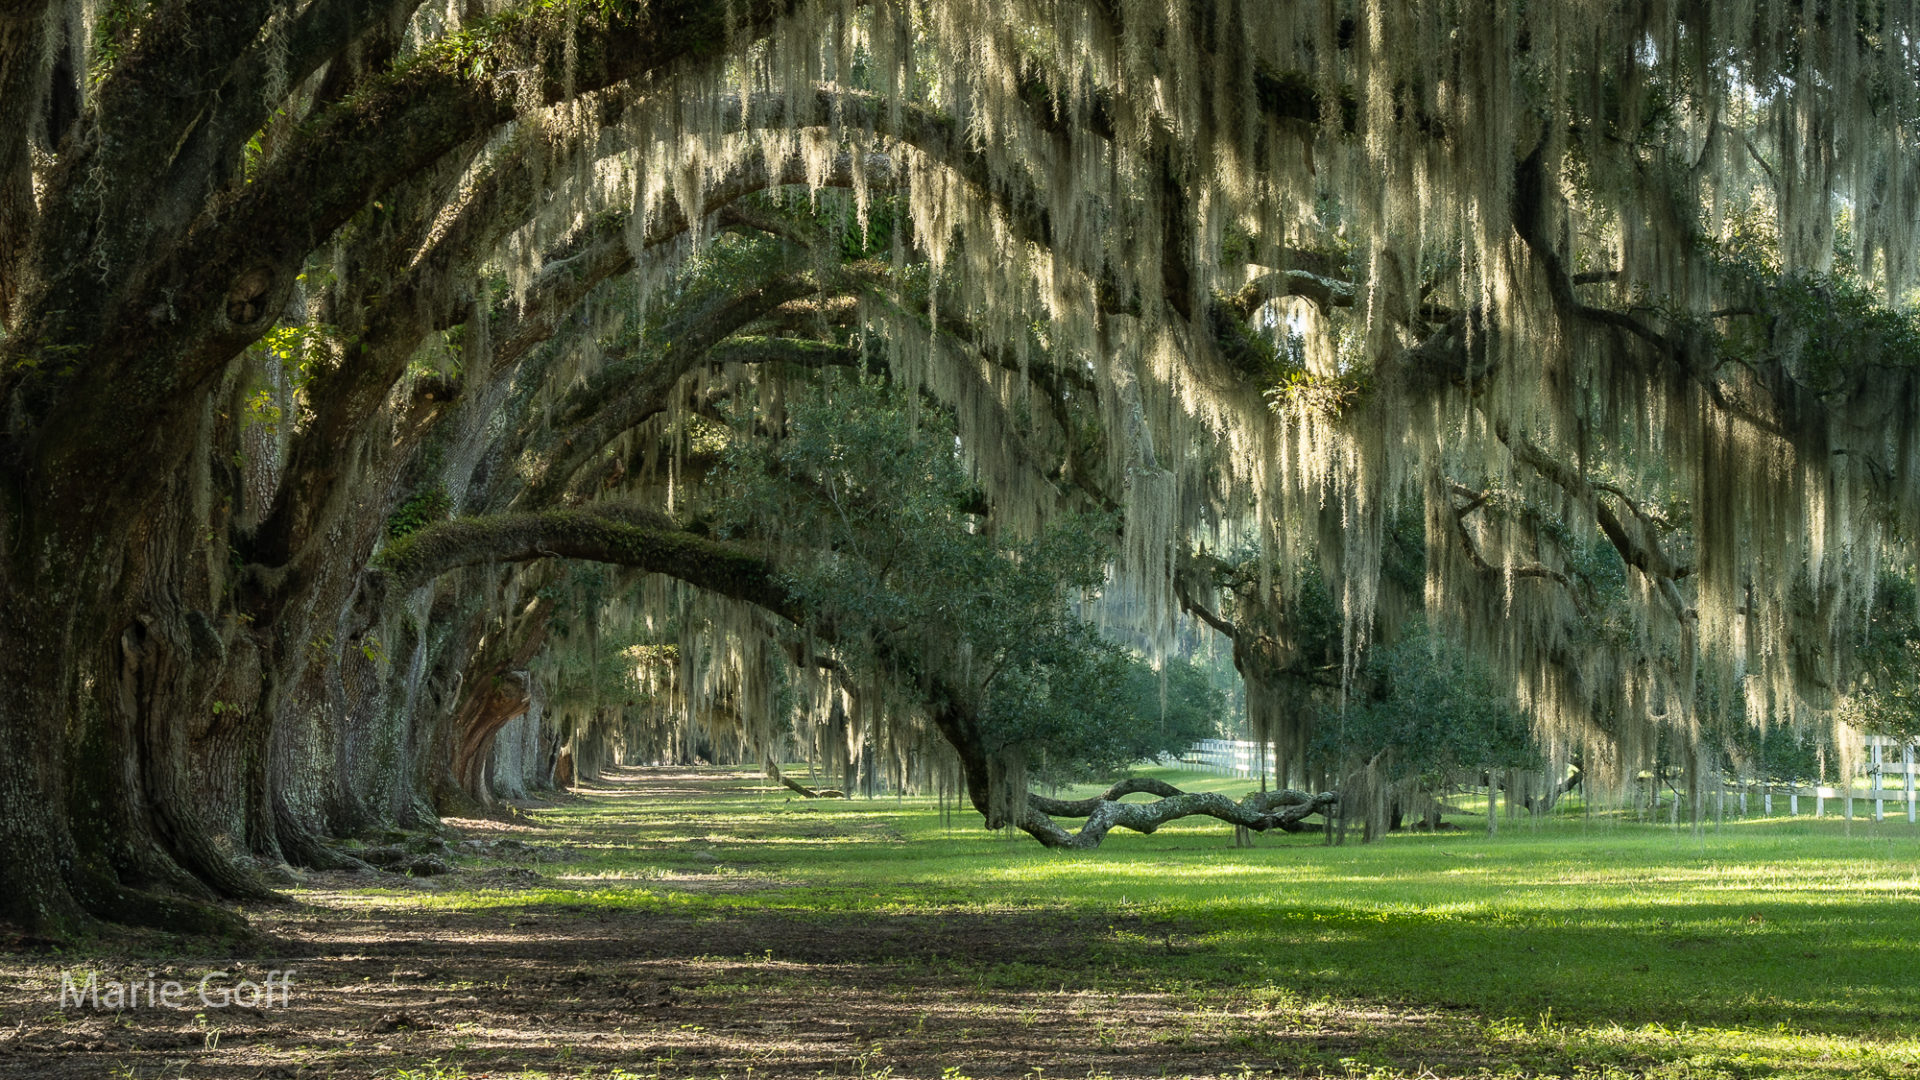 Lowcountry photography and fascinating history